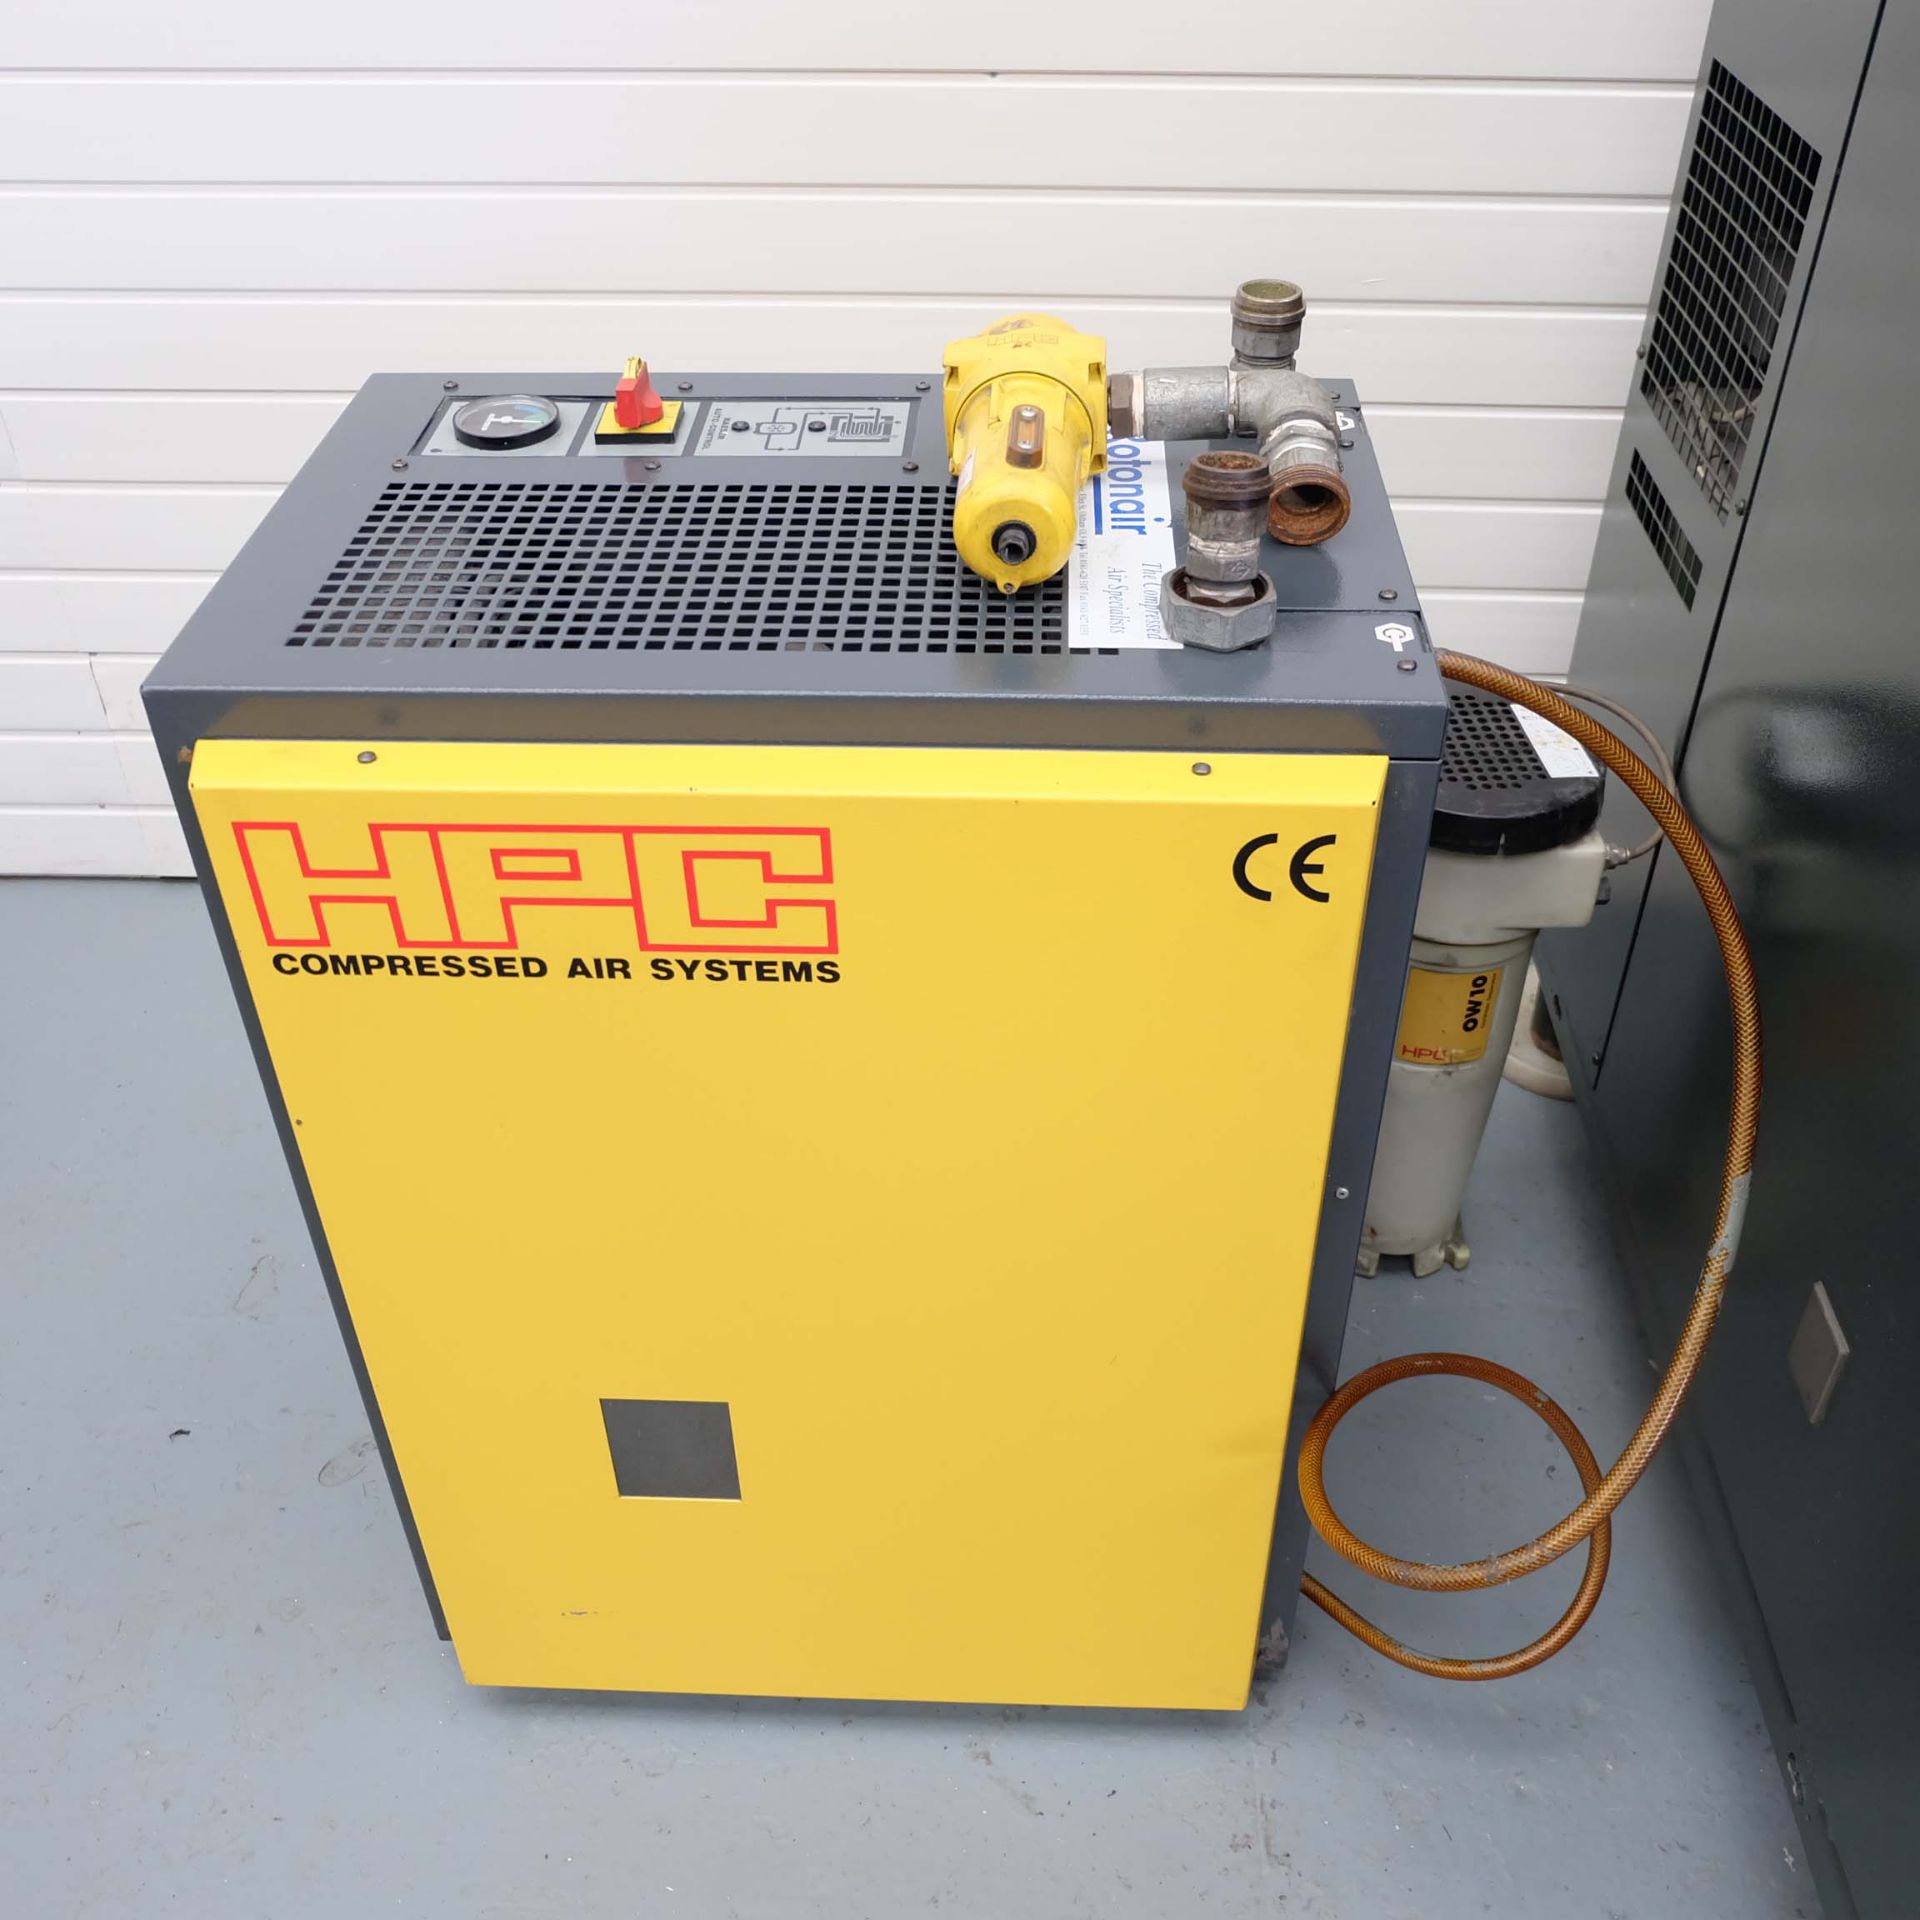 HPC Kaeser Model SK22T Rotary Air Compressor With Air Dryer Model TA8 and 350 Ltr Air Reciever Rated - Image 8 of 15